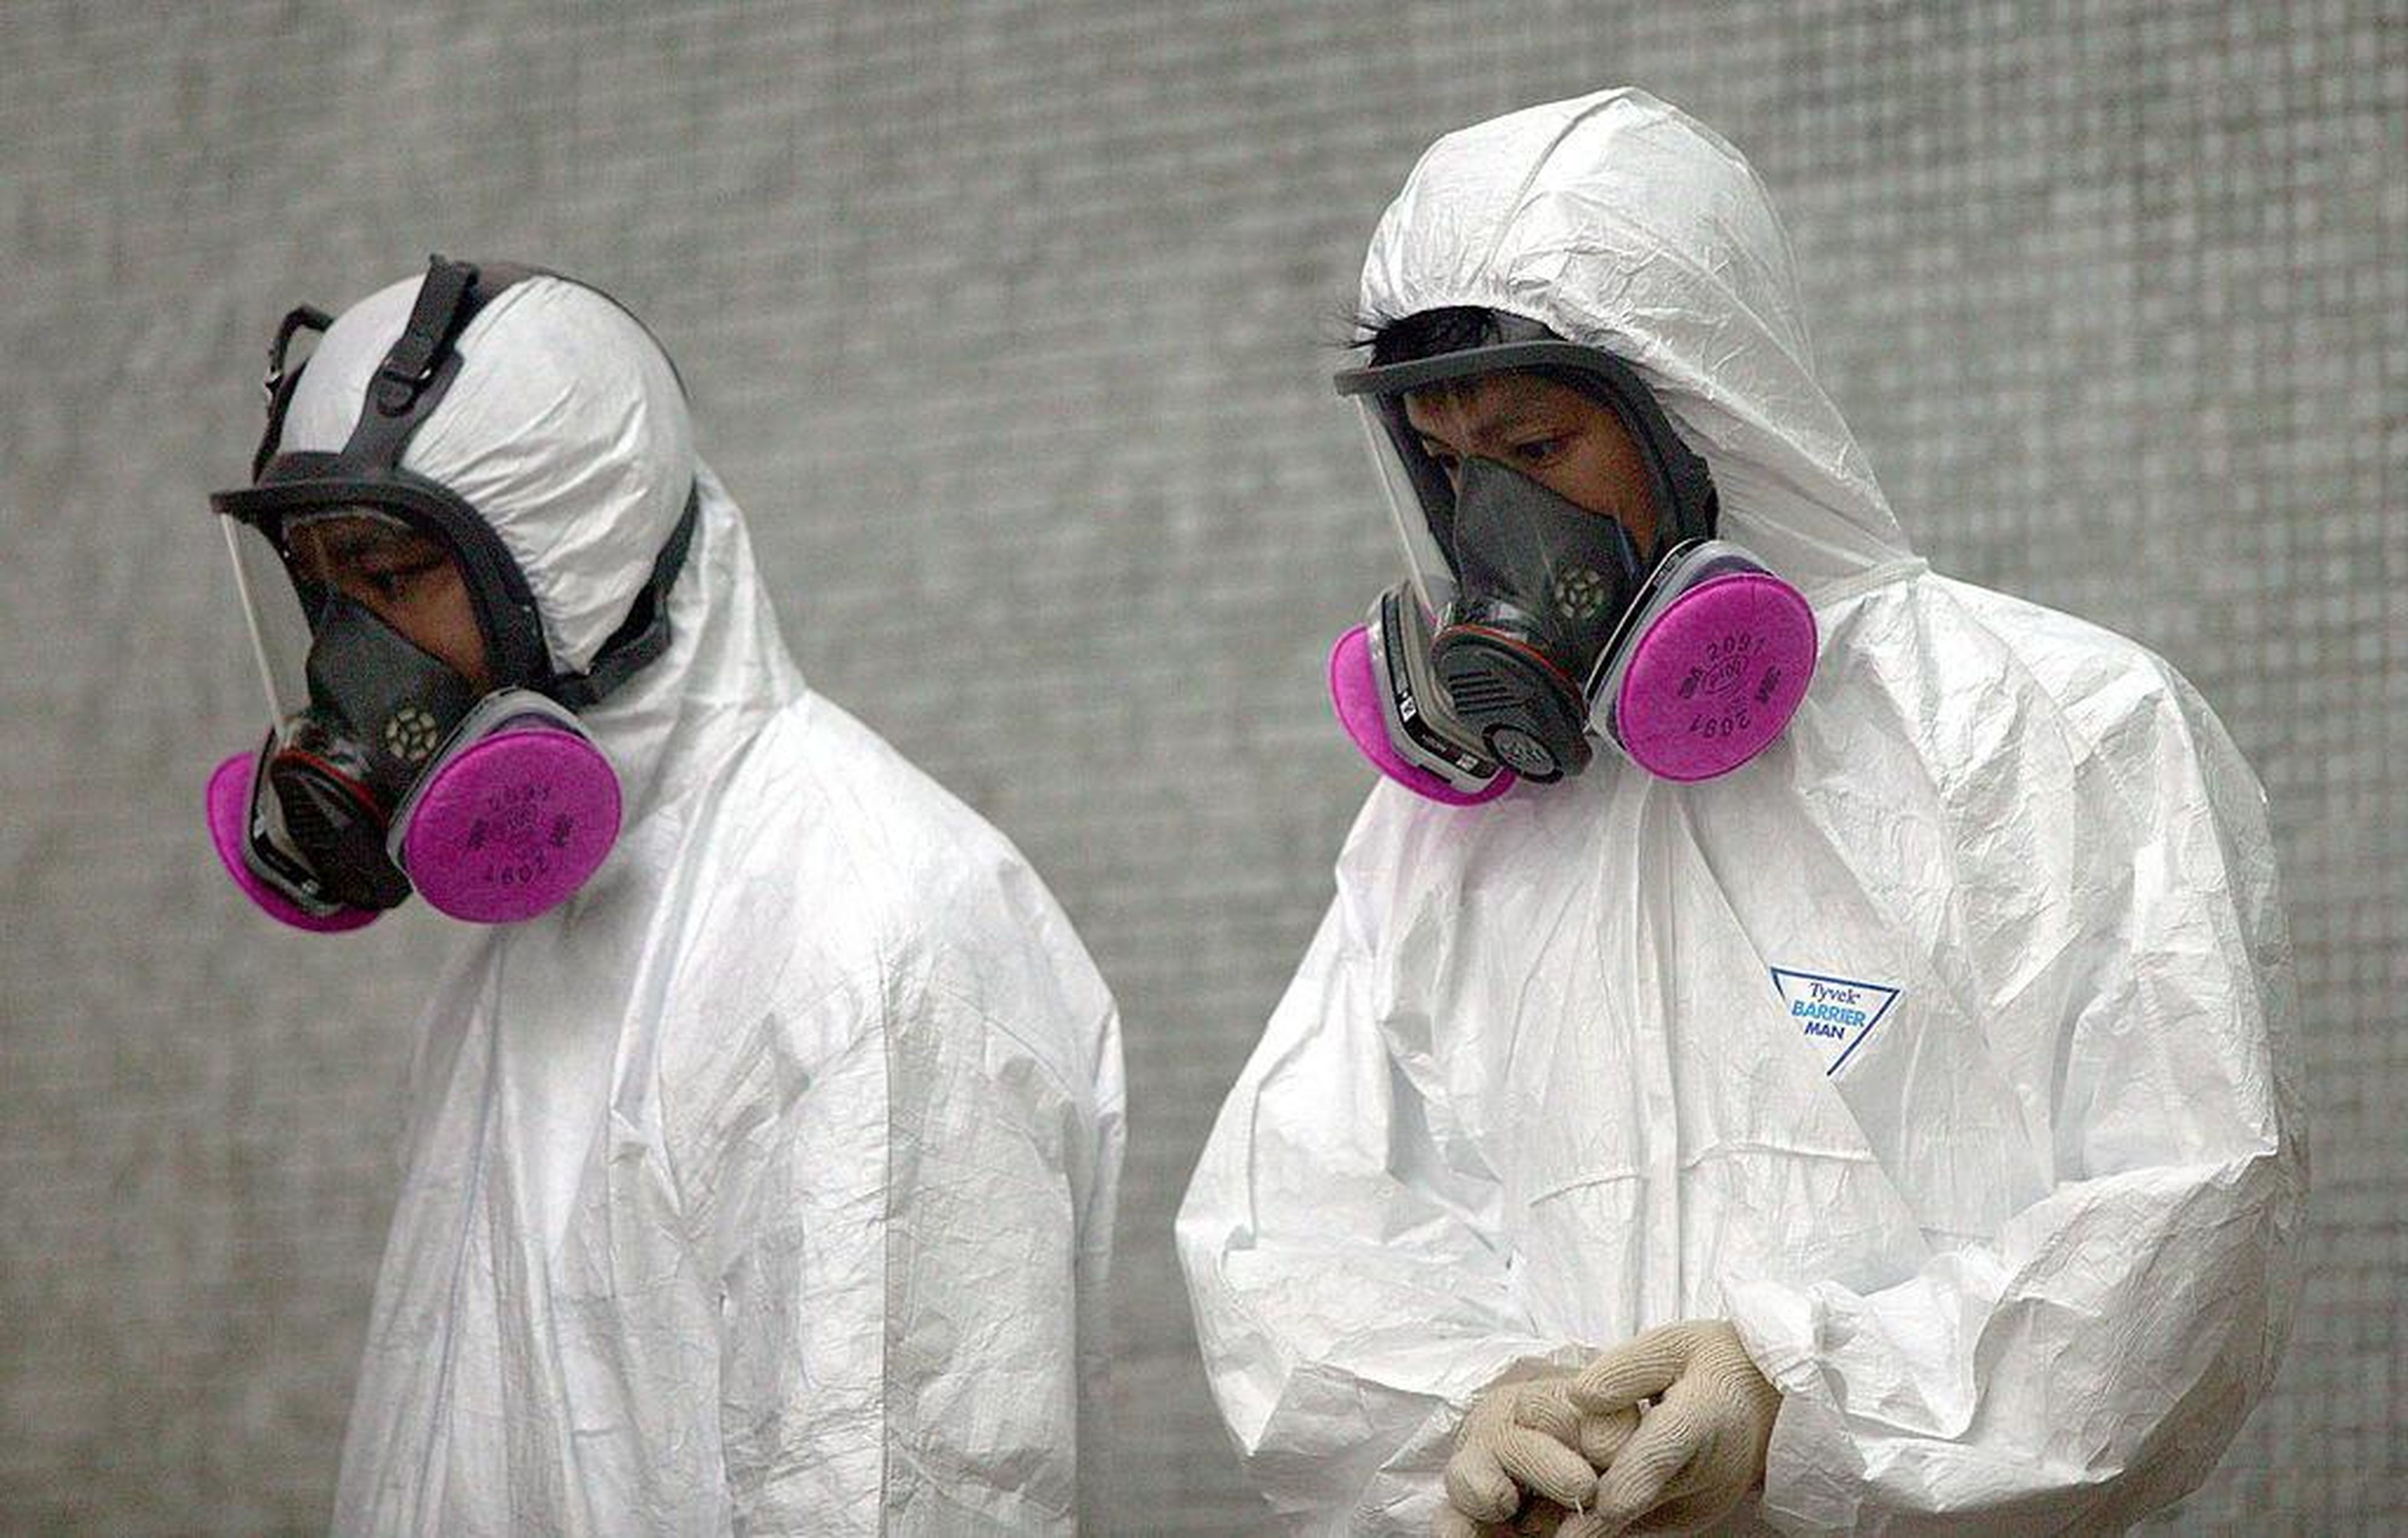 Health workers wear full protective clothing during cleanup operations at Amoy Gardens, where over 200 residents were infected with the SARS (Severe Acute Respiratory Syndrome) virus, April 4, 2003 in Hong Kong.